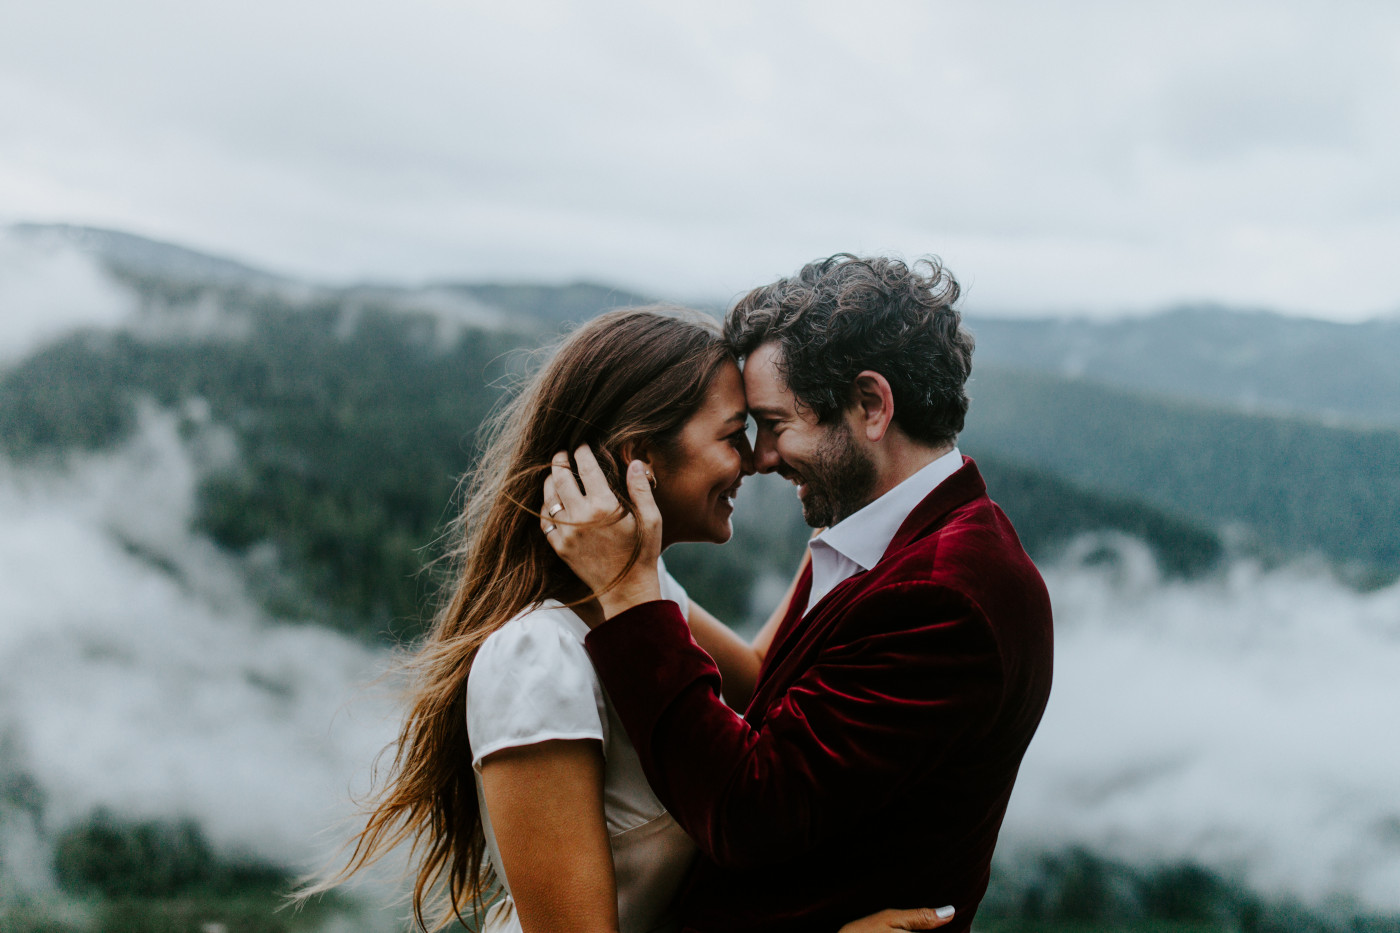 Katelyn and Murray forehead to forehead. Elopement wedding photography at Mount Hood by Sienna Plus Josh.